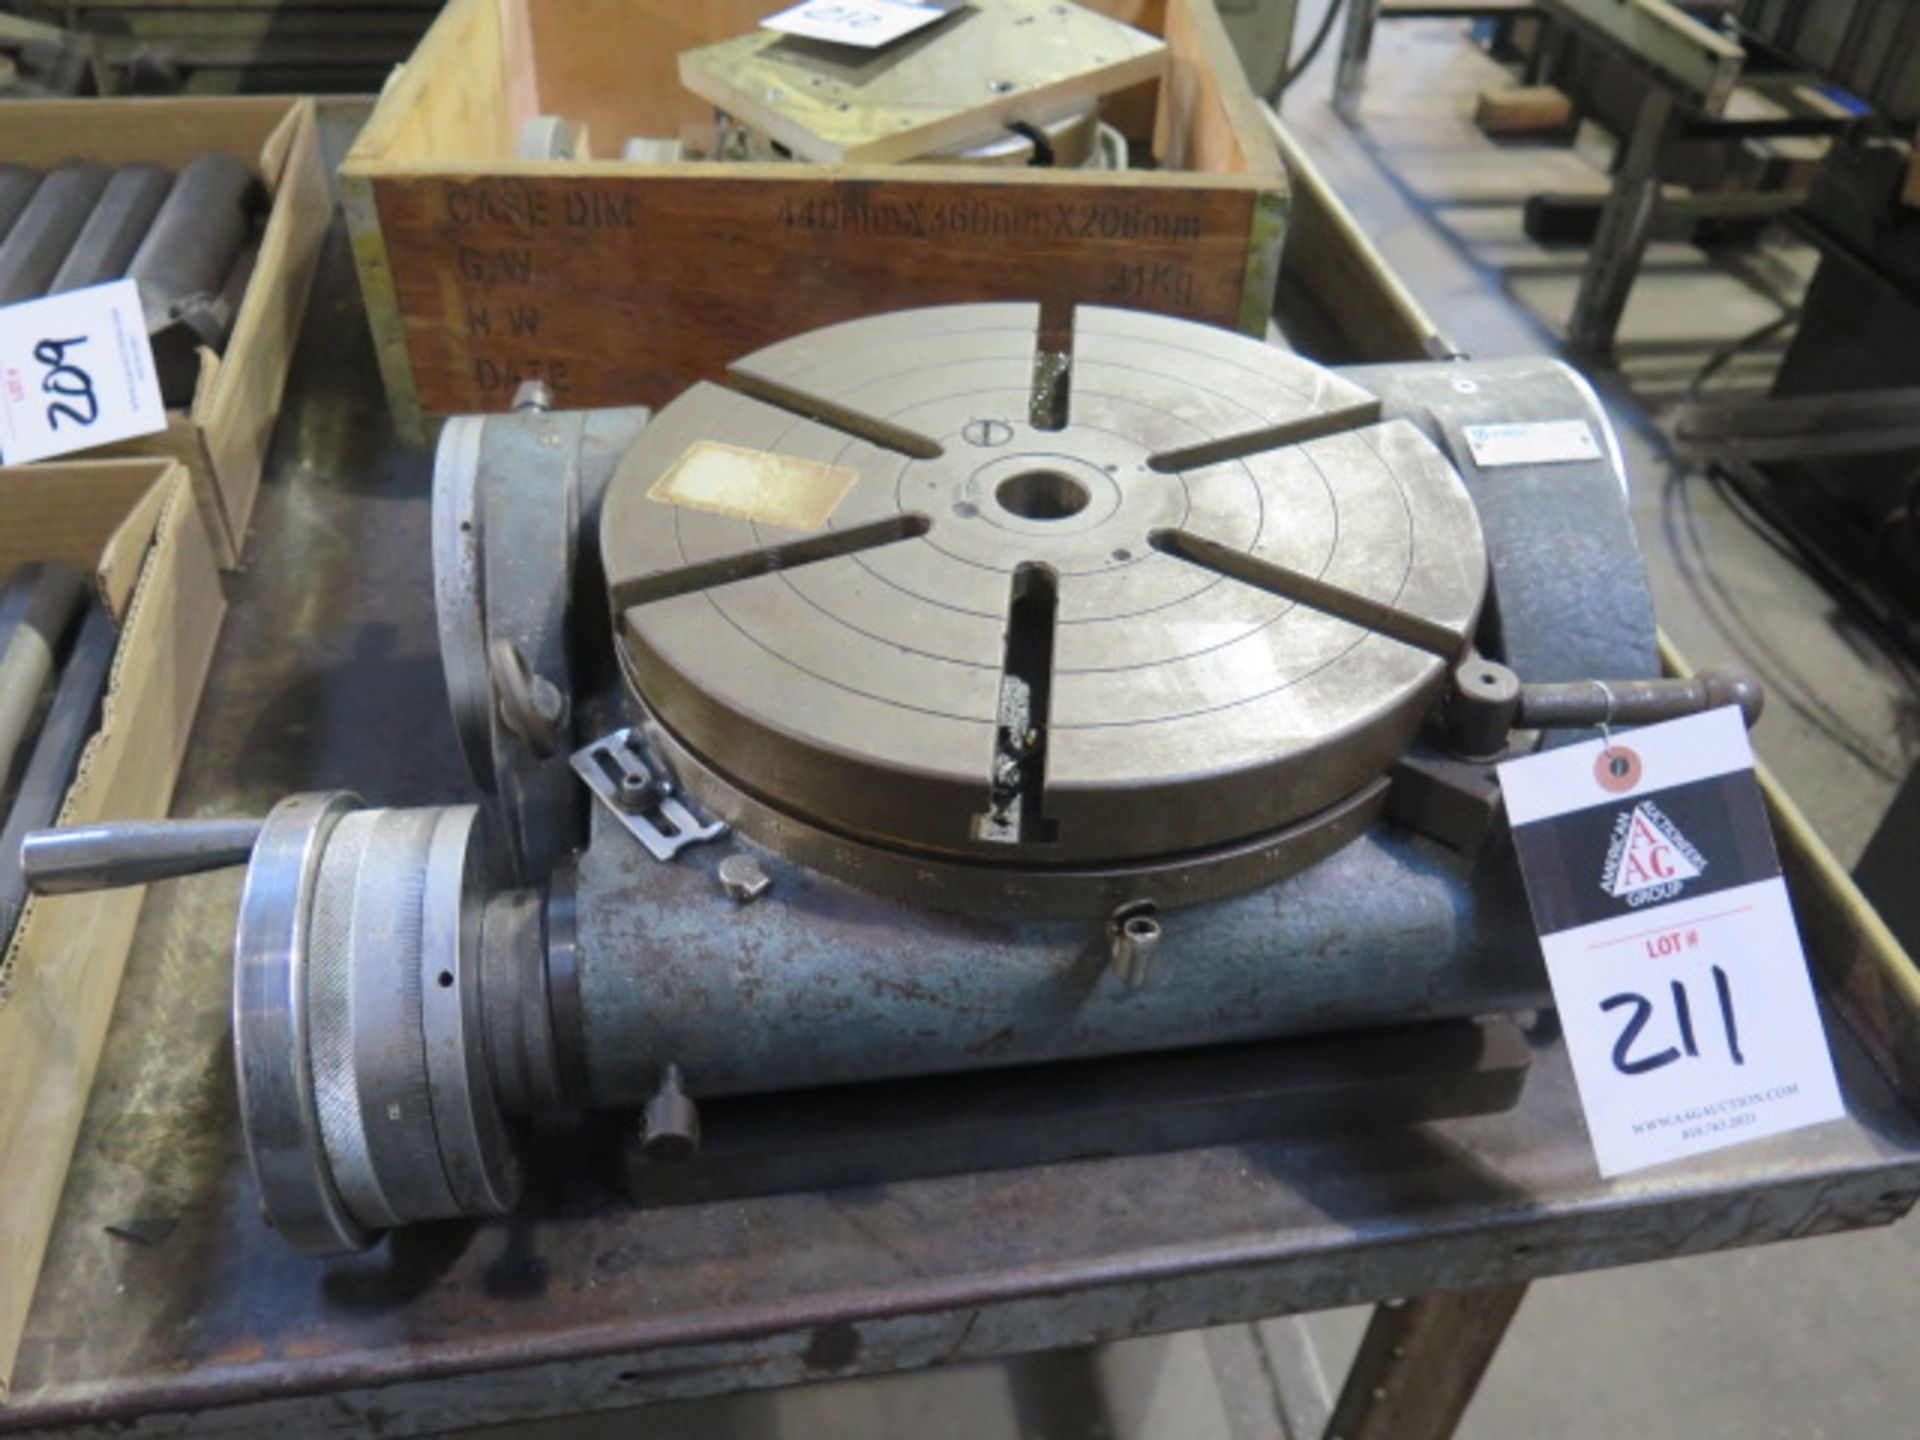 Yuasa 12" Compound Rotary Table (SOLD AS-IS - NO WARRANTY)